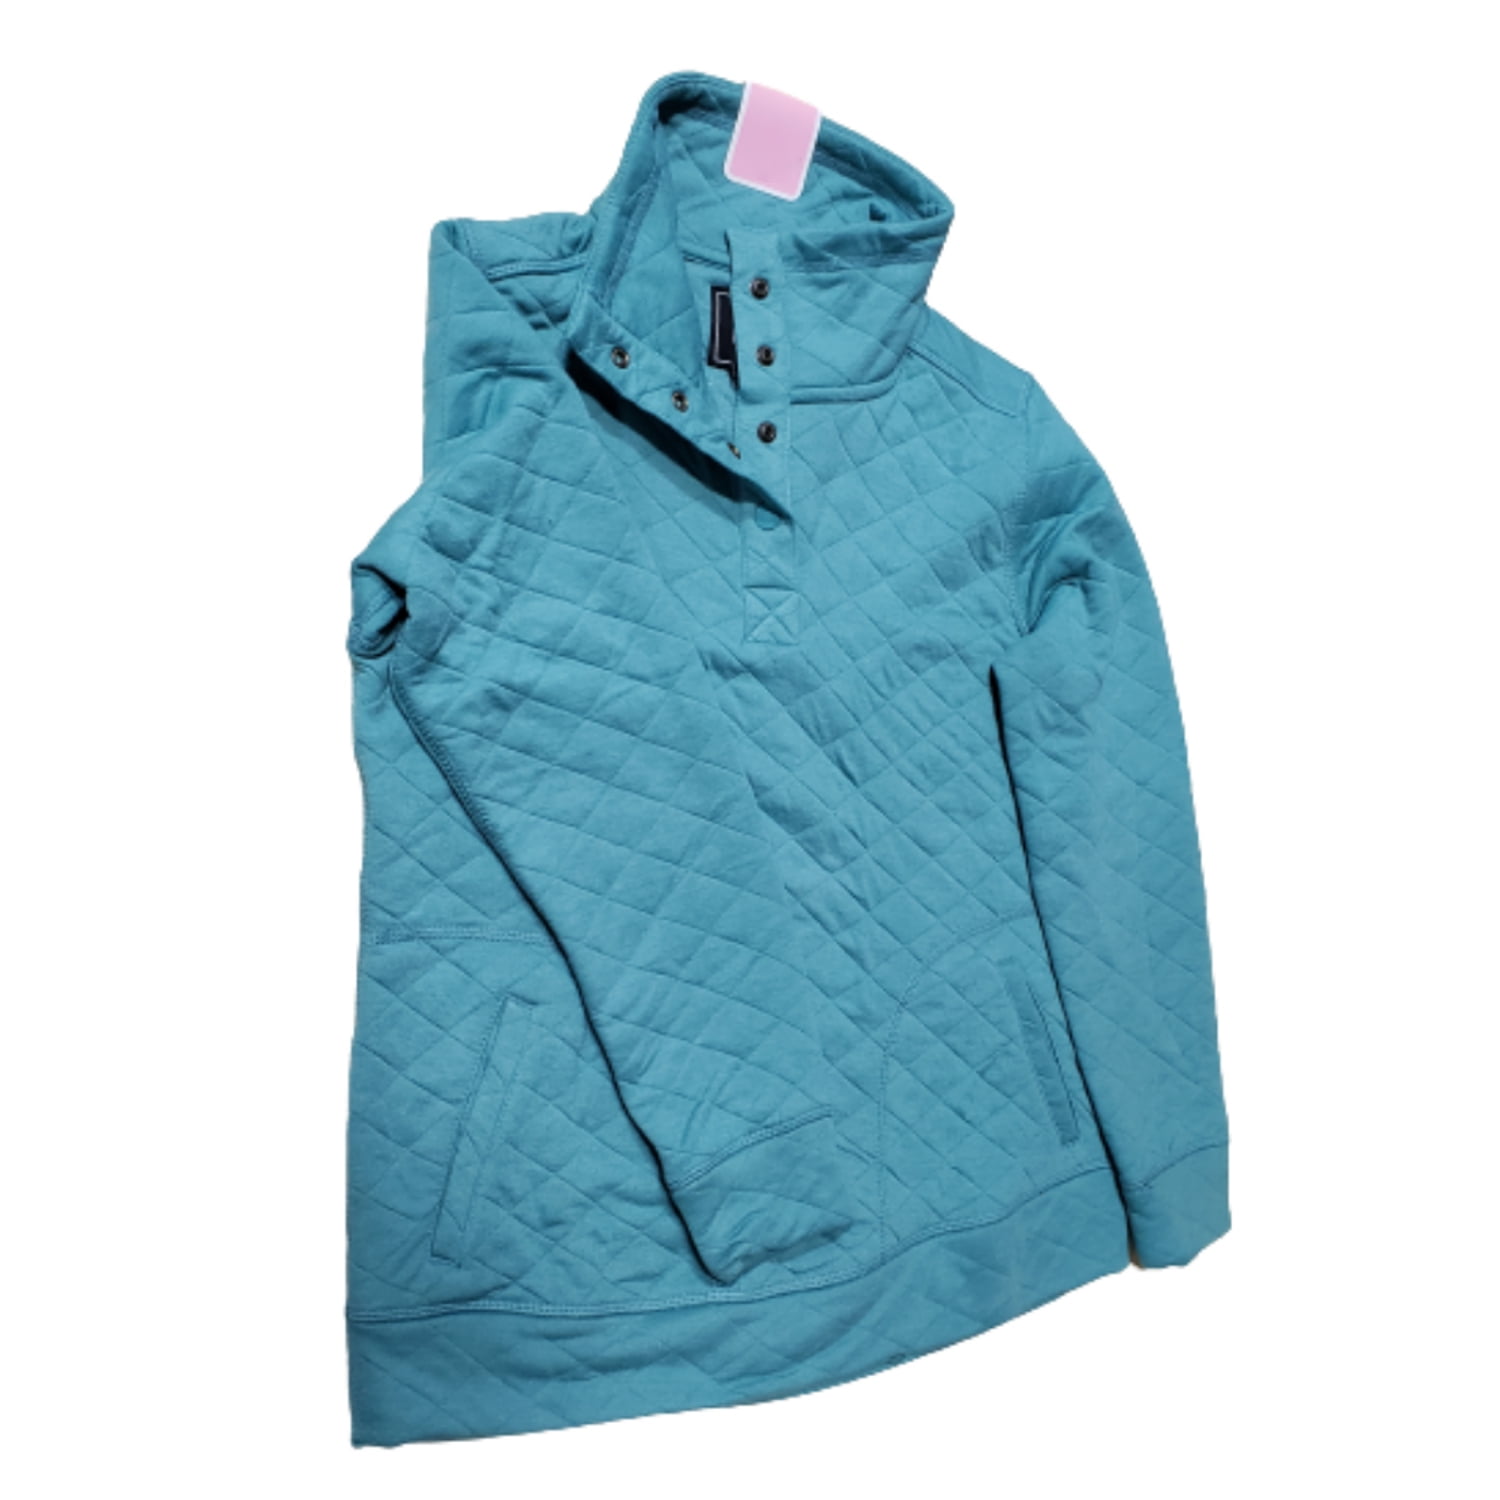 Modern Canvas Women's Long Sleeve Mock Neck Quilted Pullover Sweater w/  Snaps (Teal, M) 